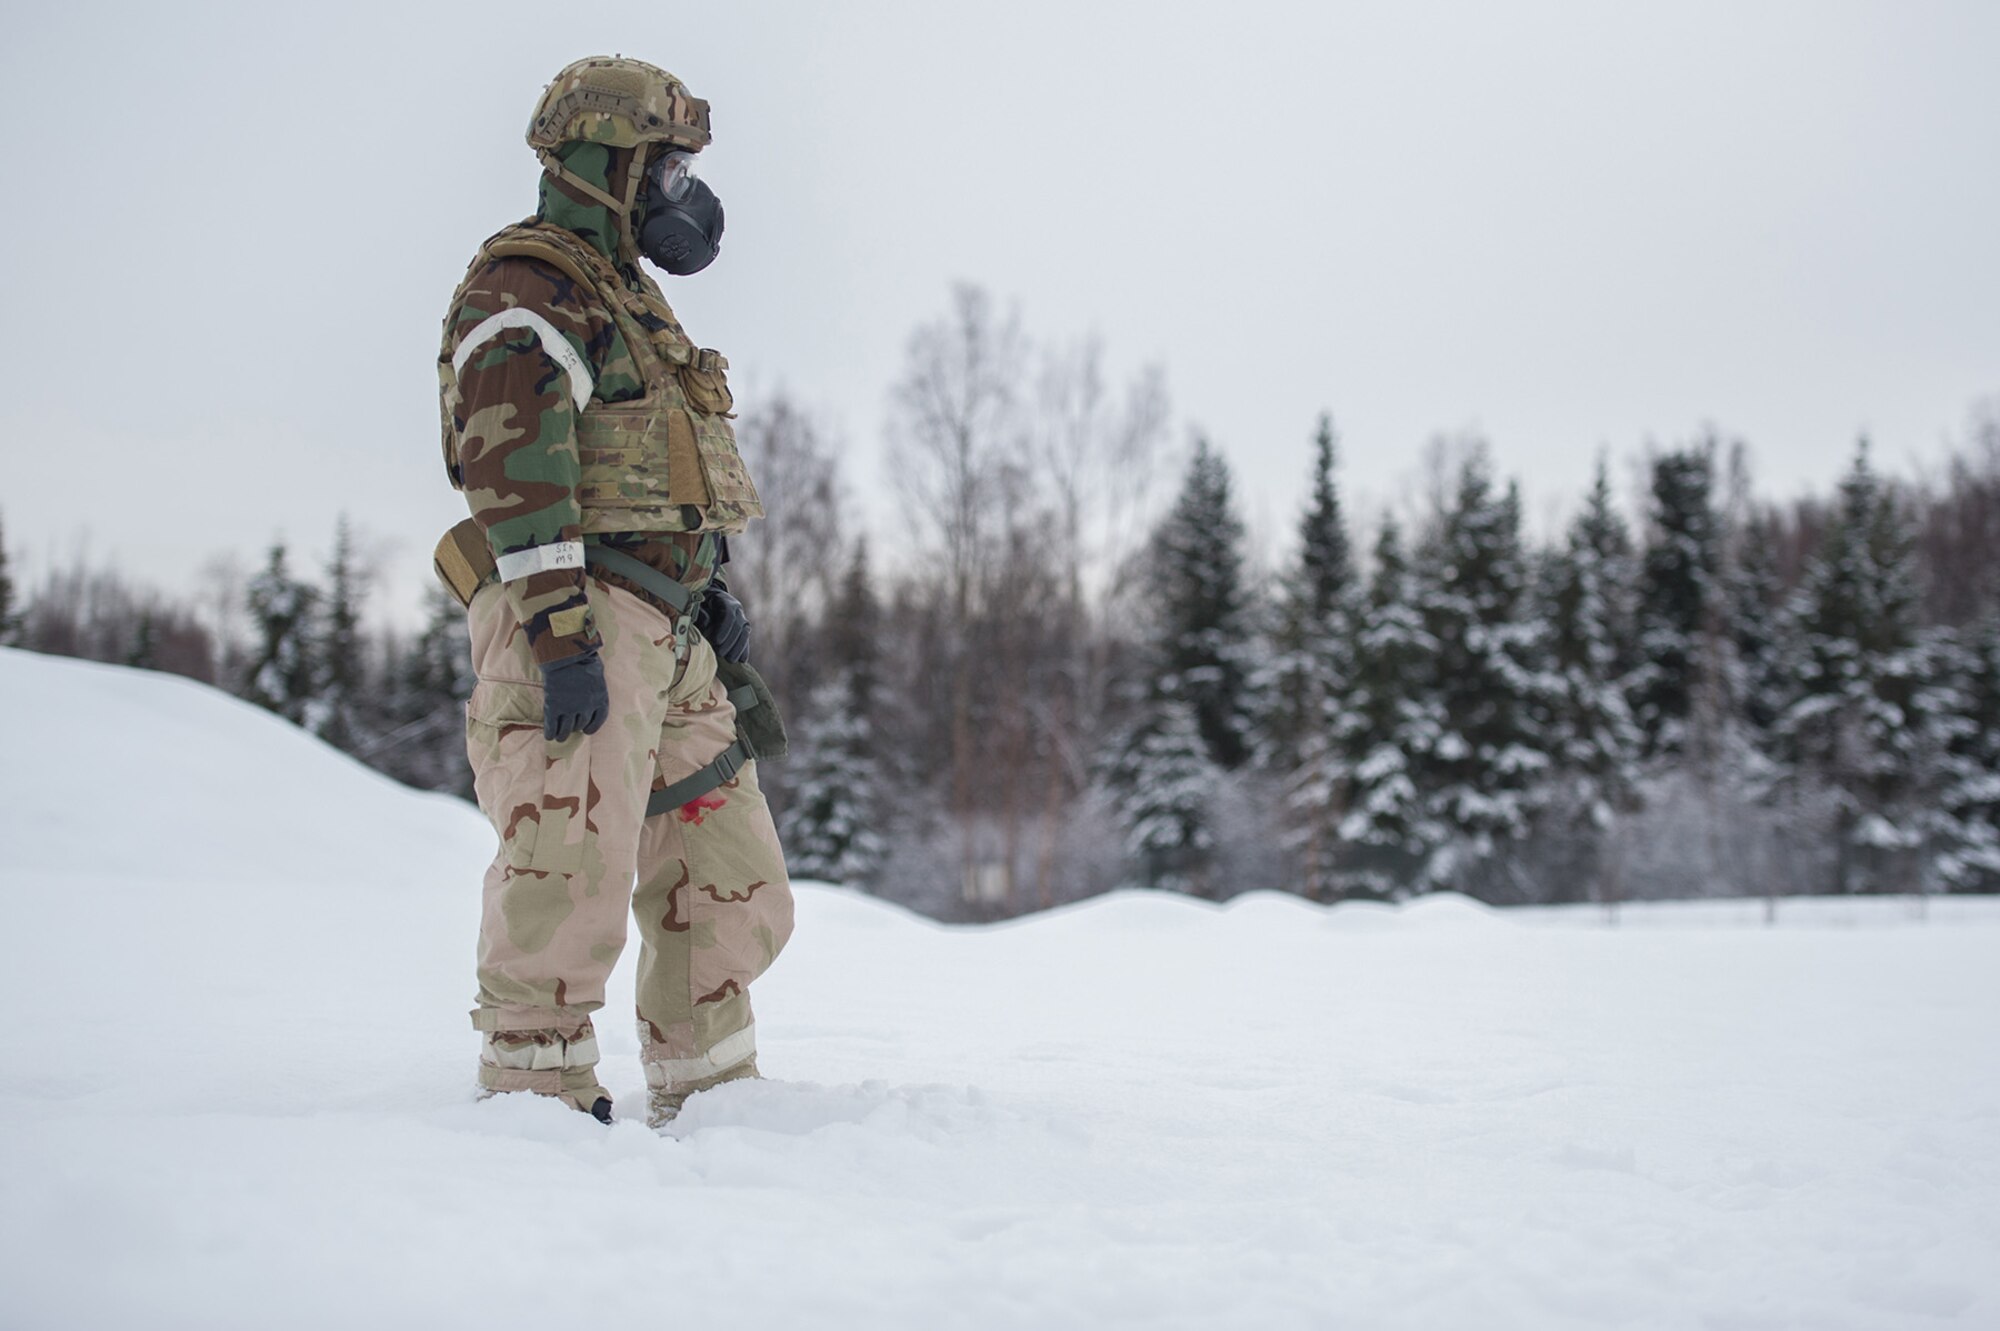 Senior Master Sgt. Ronald White observes his Airmen, assigned to the 673d Civil Engineer Squadron, Explosives Ordinance Disposal Flight, preparing for a live-fire demolitions exercise in Mission Oriented Protective Posture 4 on Joint Base Elmendorf-Richardson, Alaska, Feb.14, 2018.  The Airmen were conducting EOD training in a simulated chemical weapons contaminated environment.